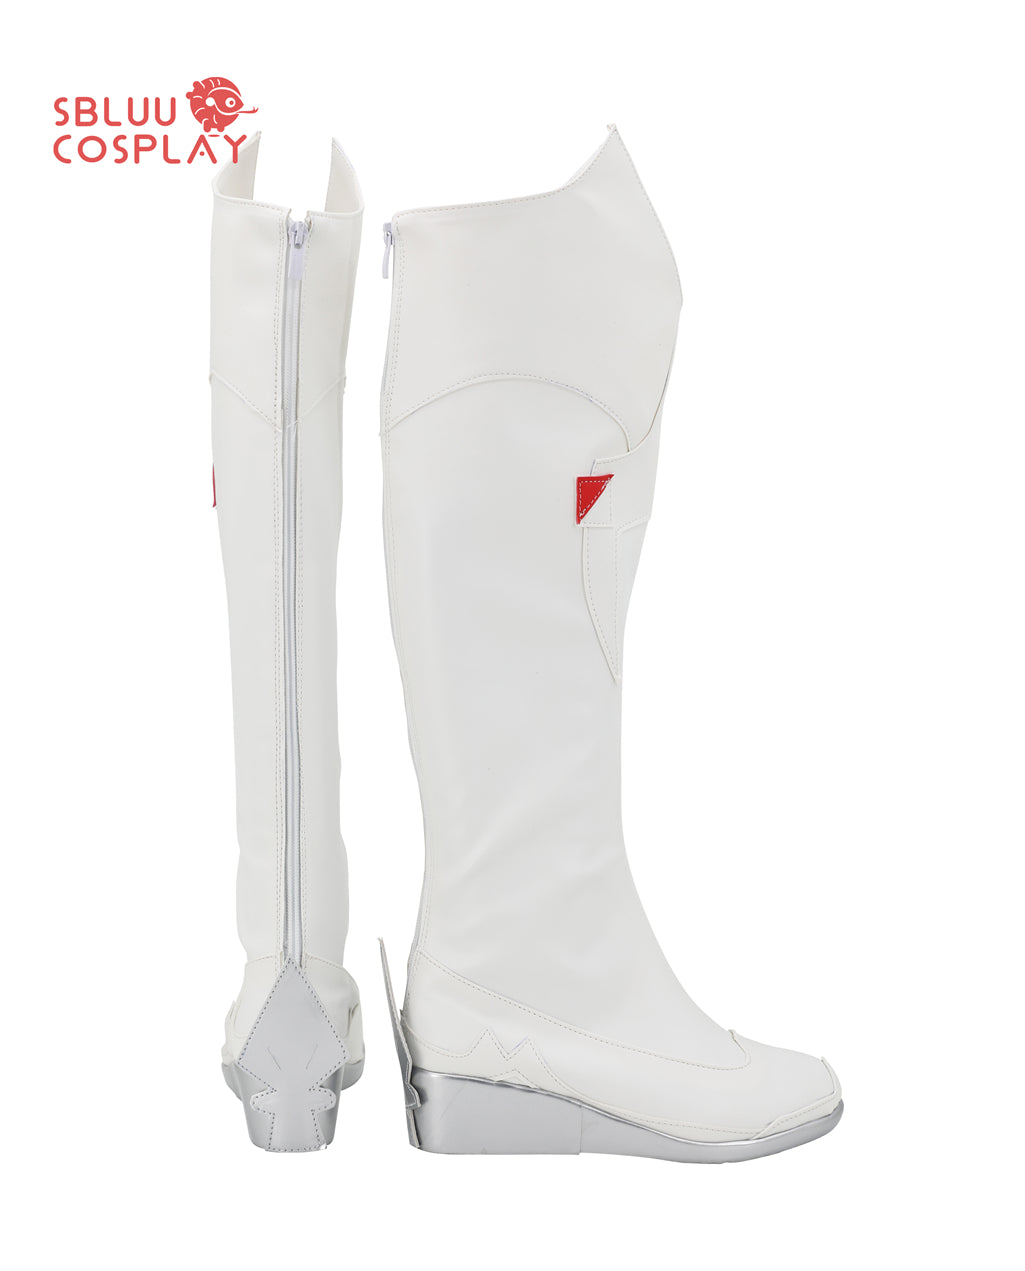 SBluuCosplay Final Fantasy XIV Alisaie Leveilleur Cosplay Shoes Boots